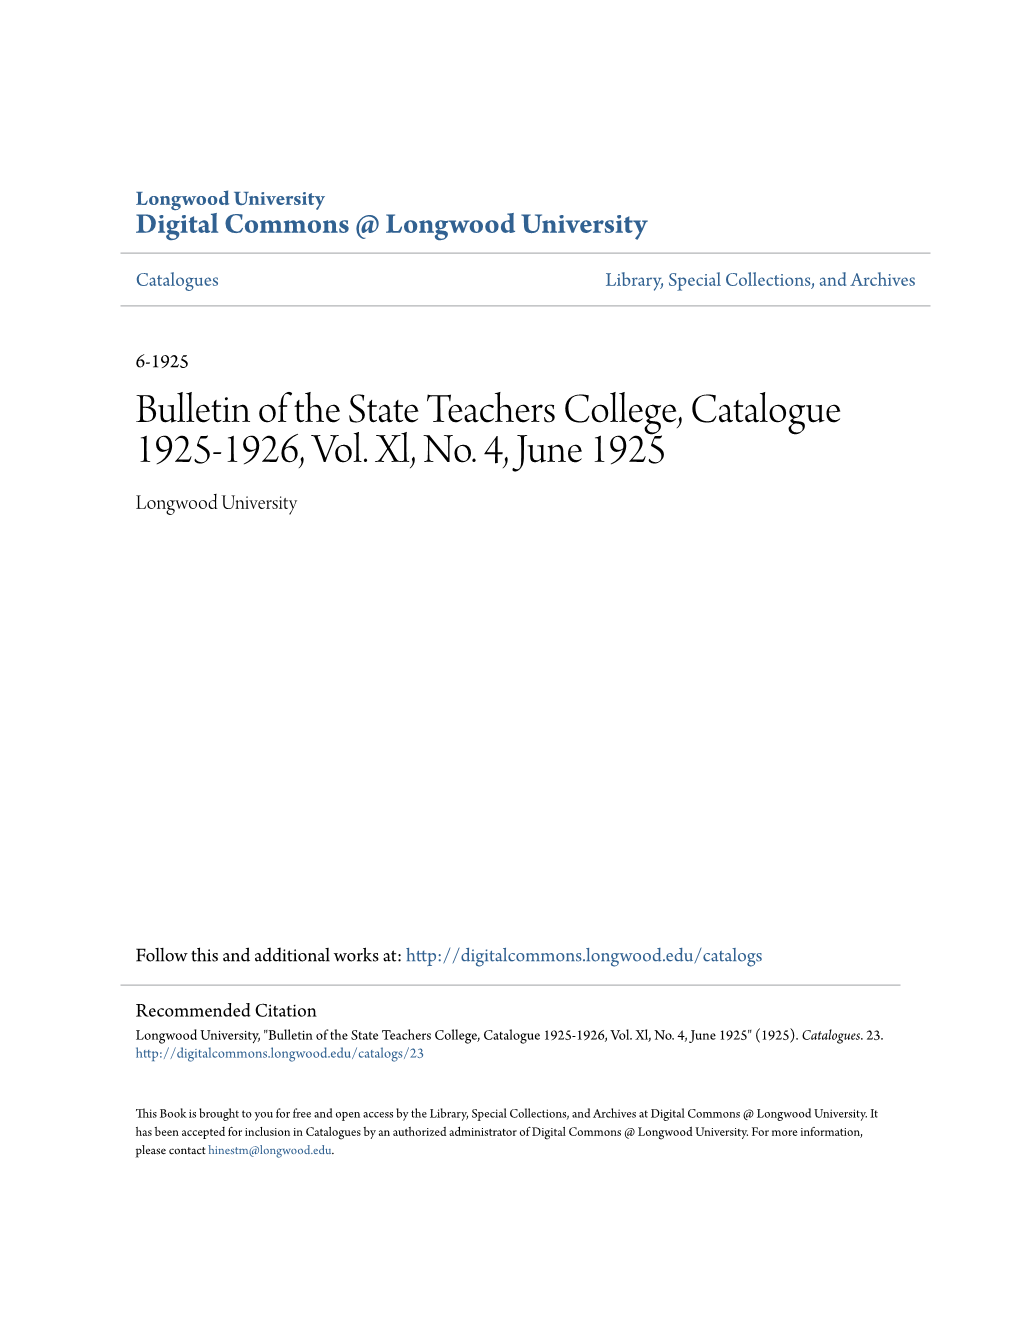 Bulletin of the State Teachers College, Catalogue 1925-1926, Vol